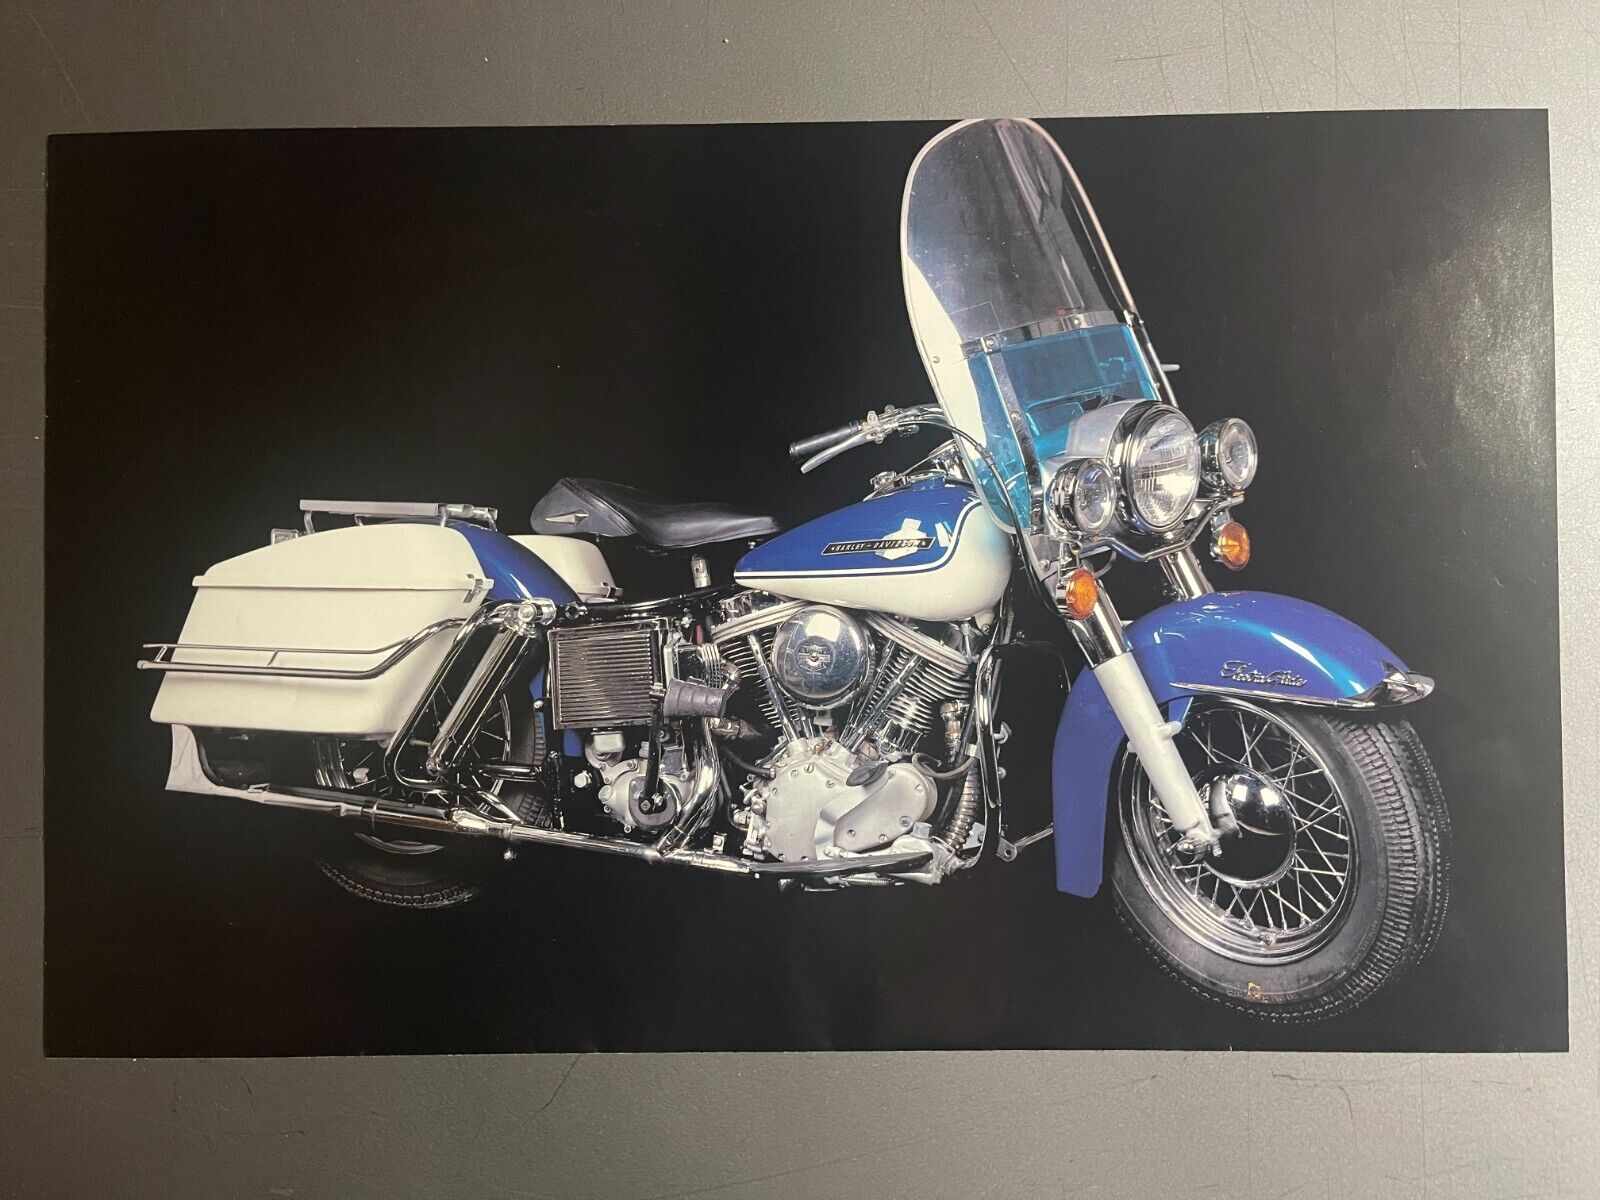 1965 Harley Davidson FLH Motorcycle Picture, Print - RARE Awesome Frameable